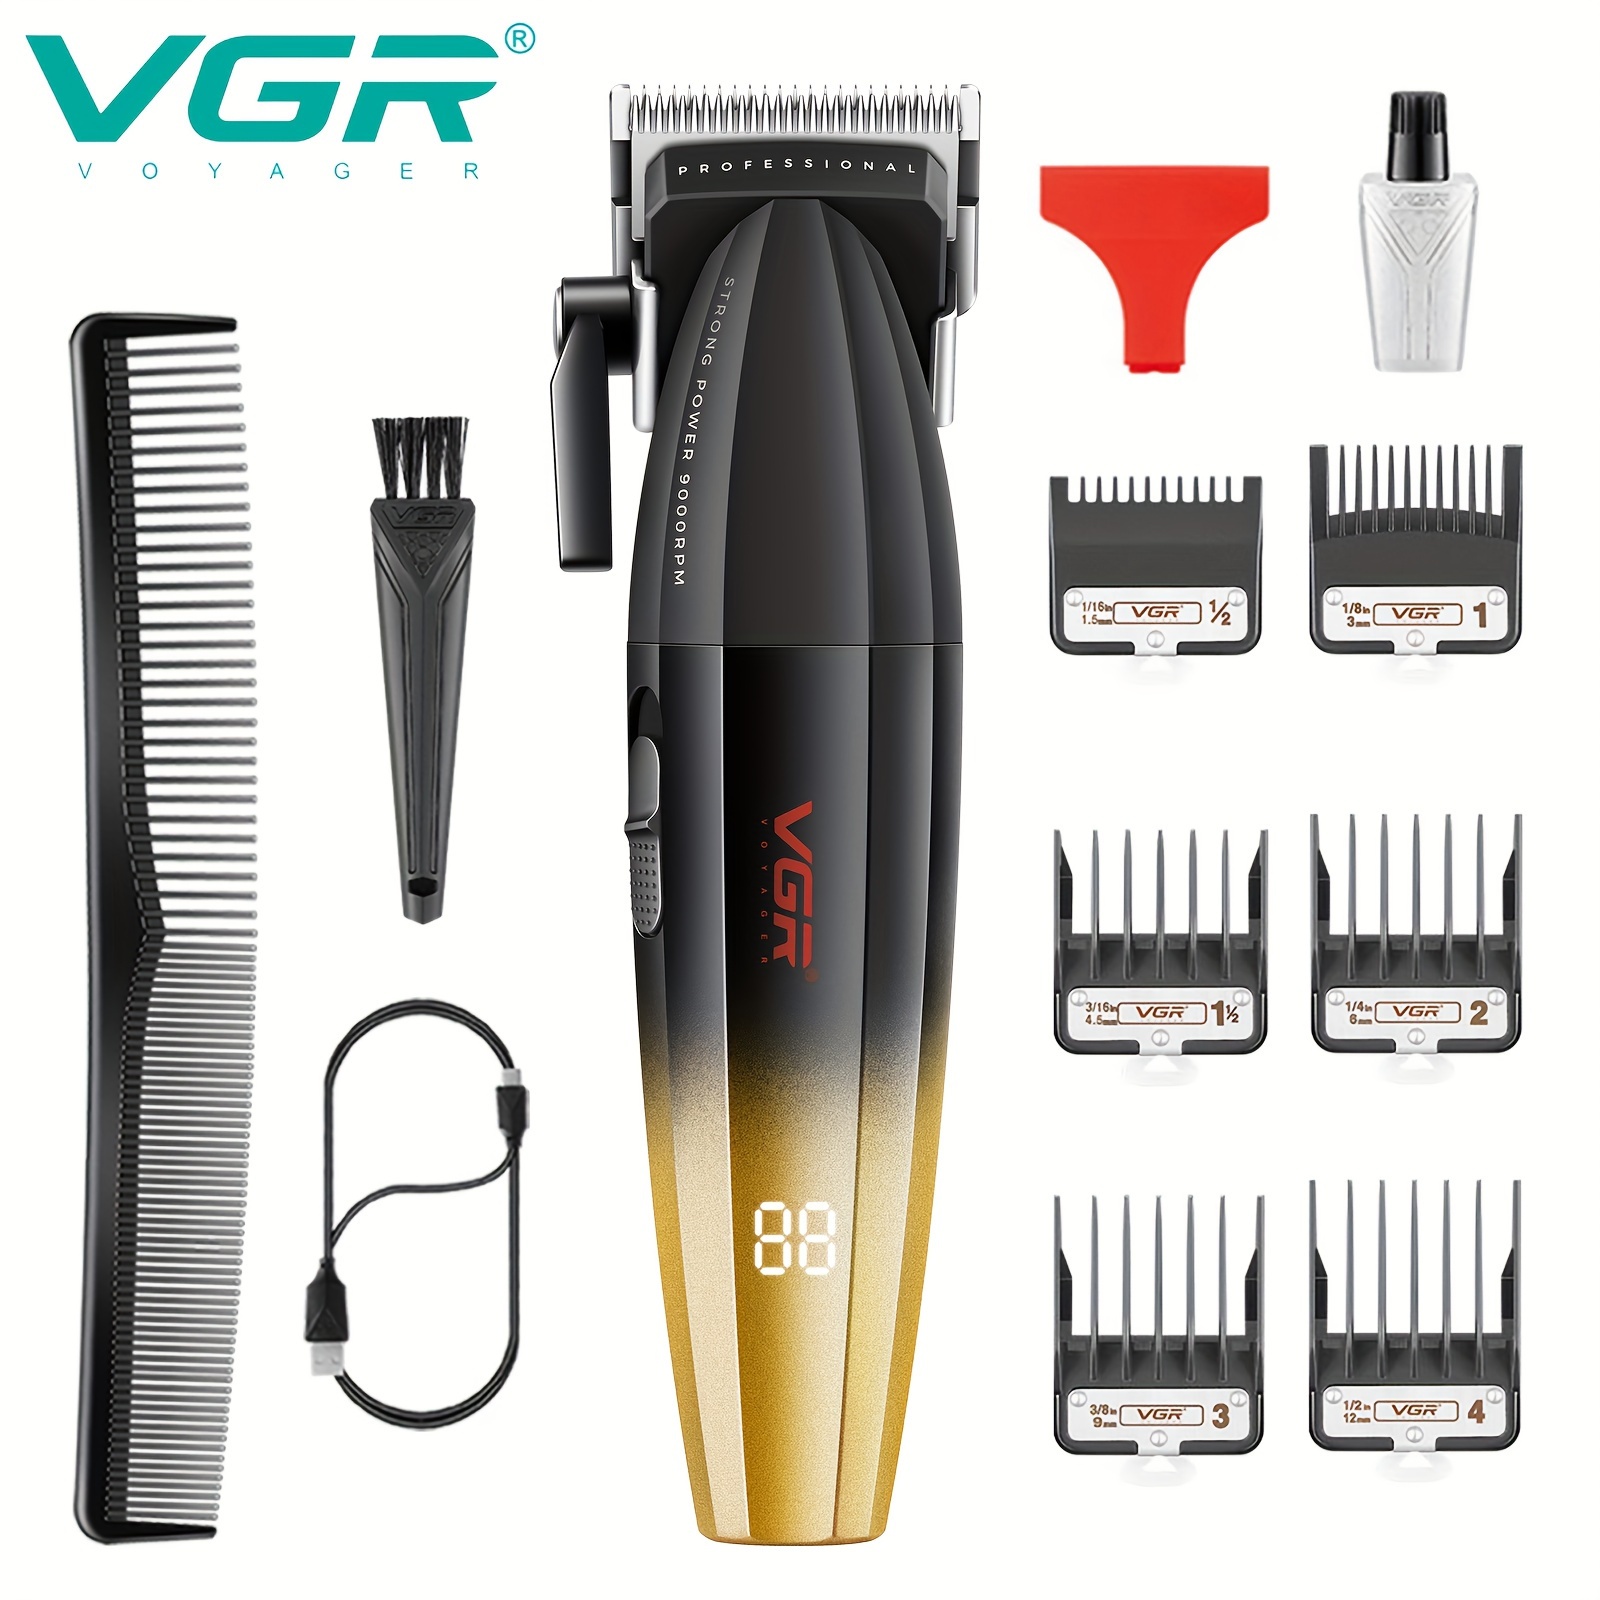 

Vgr 003 Fresh Fade Hair Clipper, Professional Hair Trimmer, Cord/cordless Rechargeable Hair Cutting Tools With Led Display, 9000rpm, Gift For Men